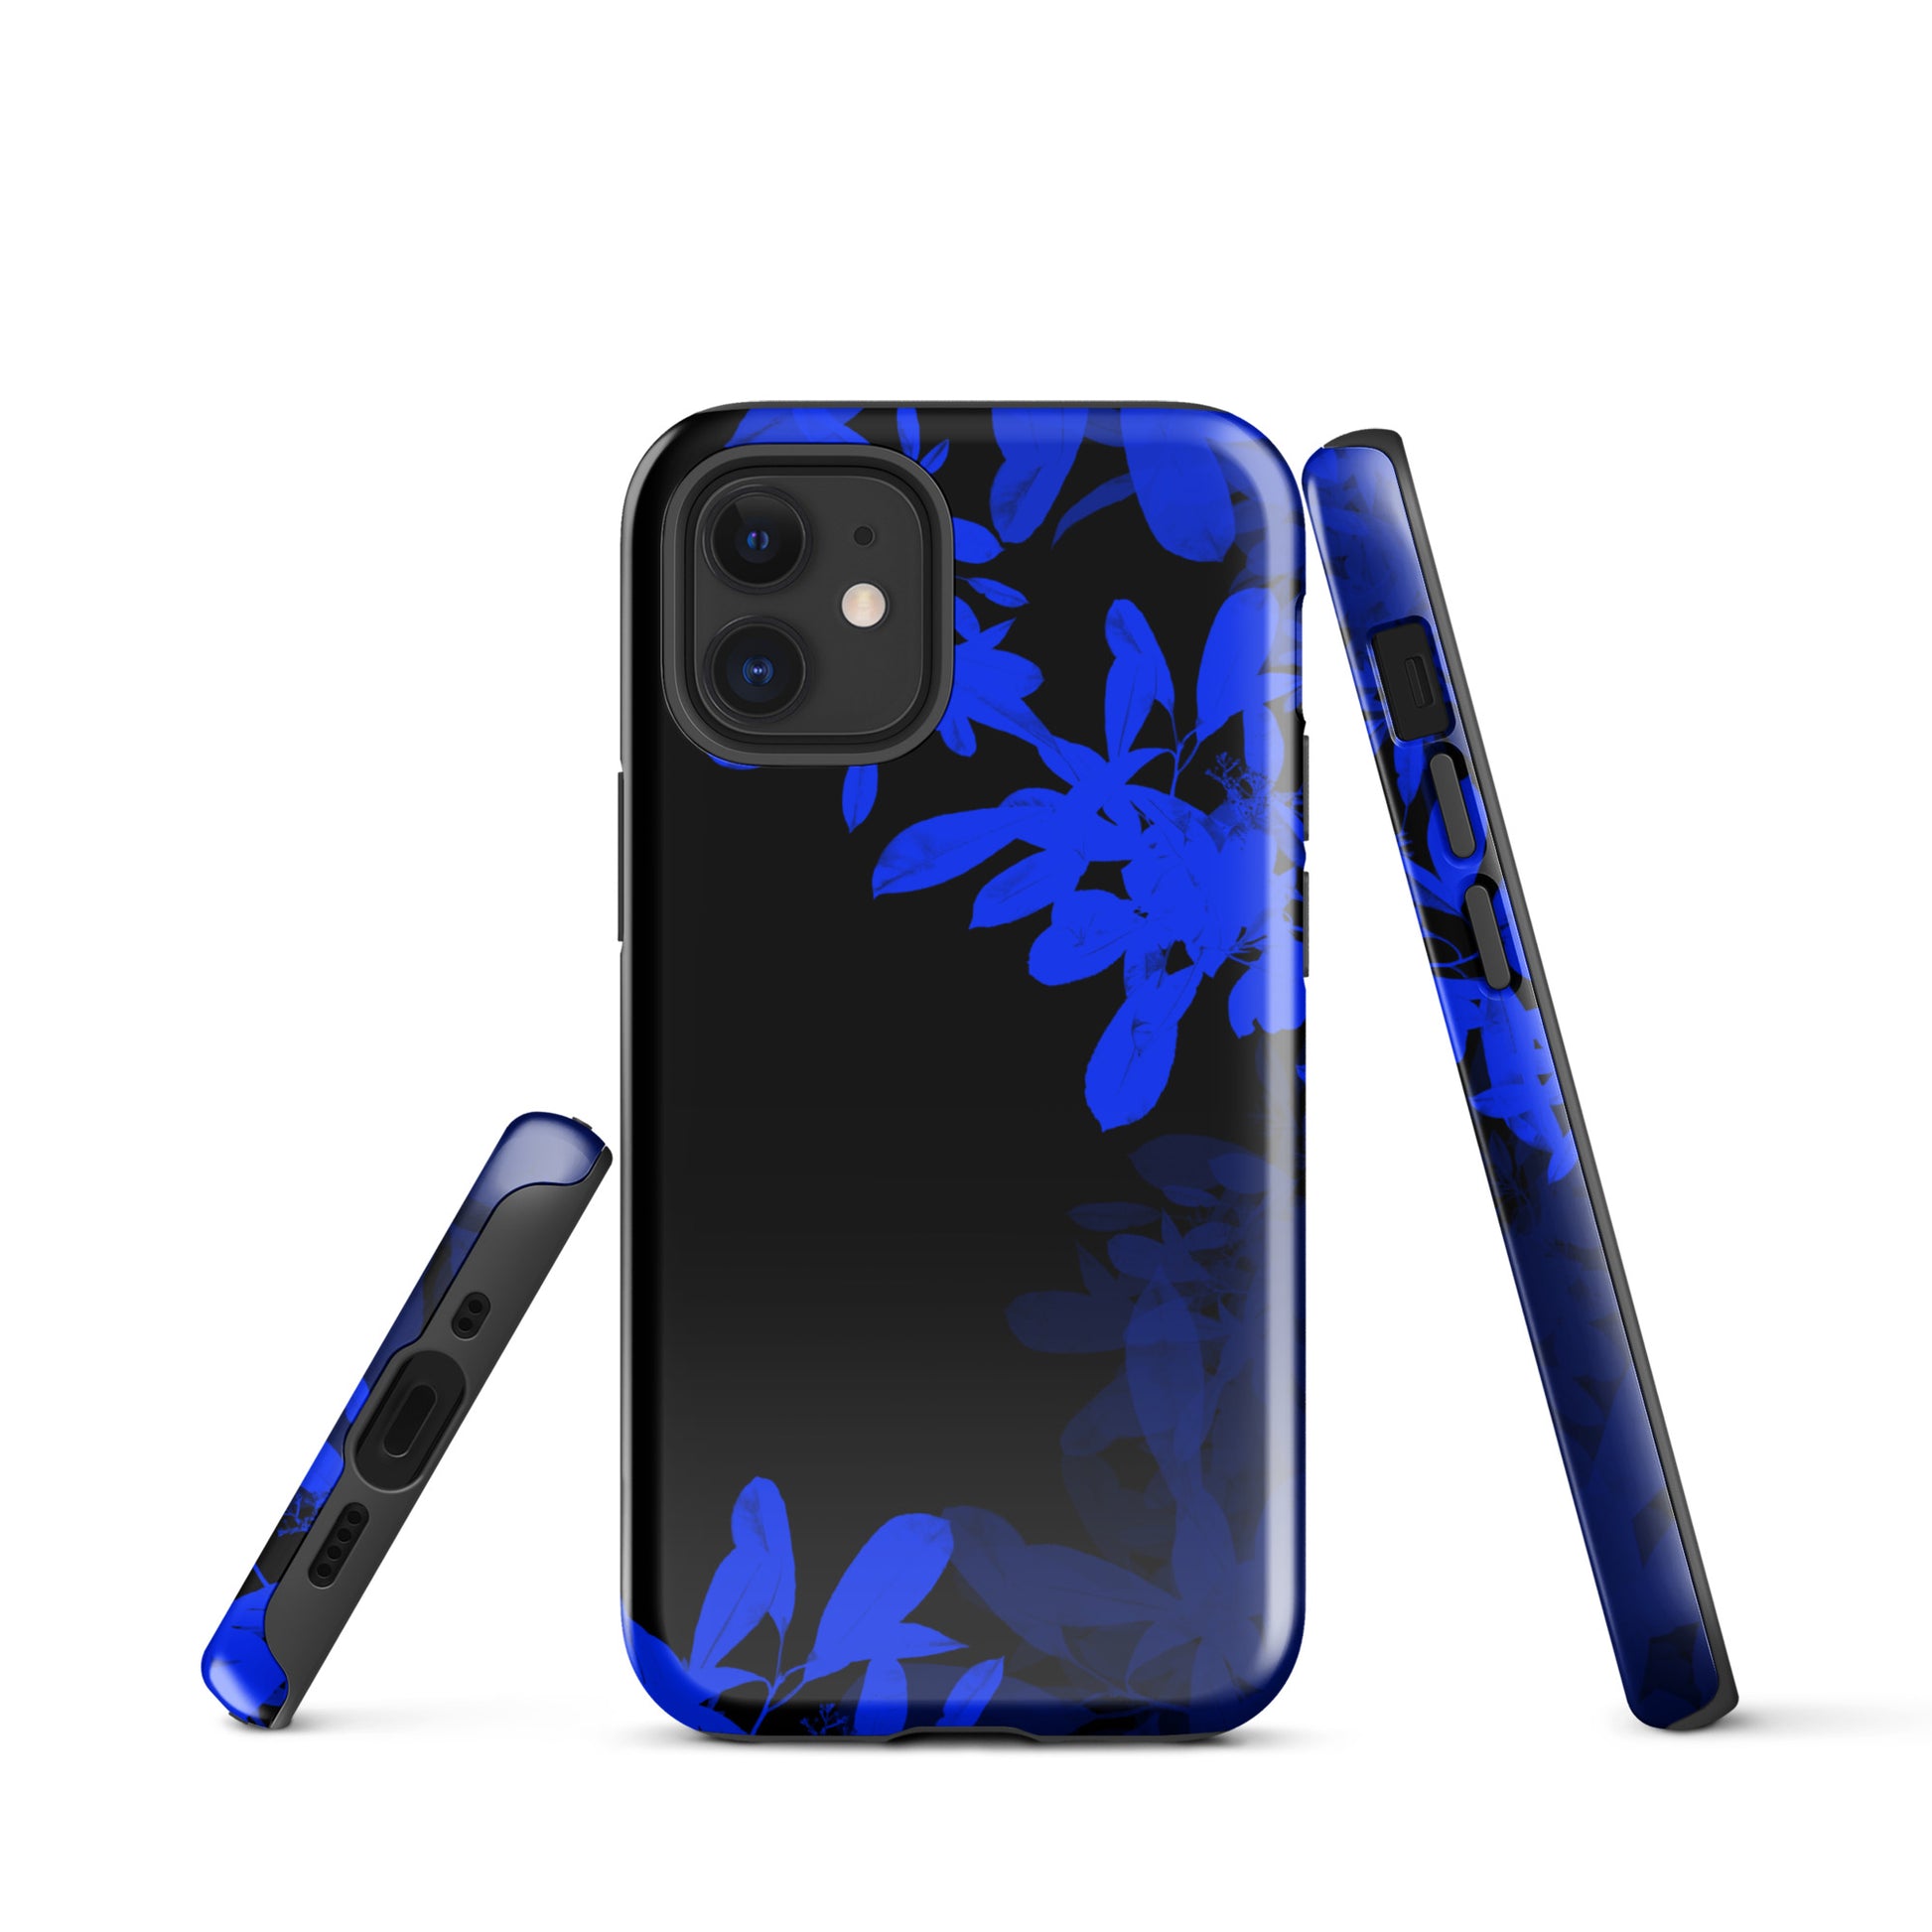 A Night Blue Plant Case for the iPhone 12 Mini